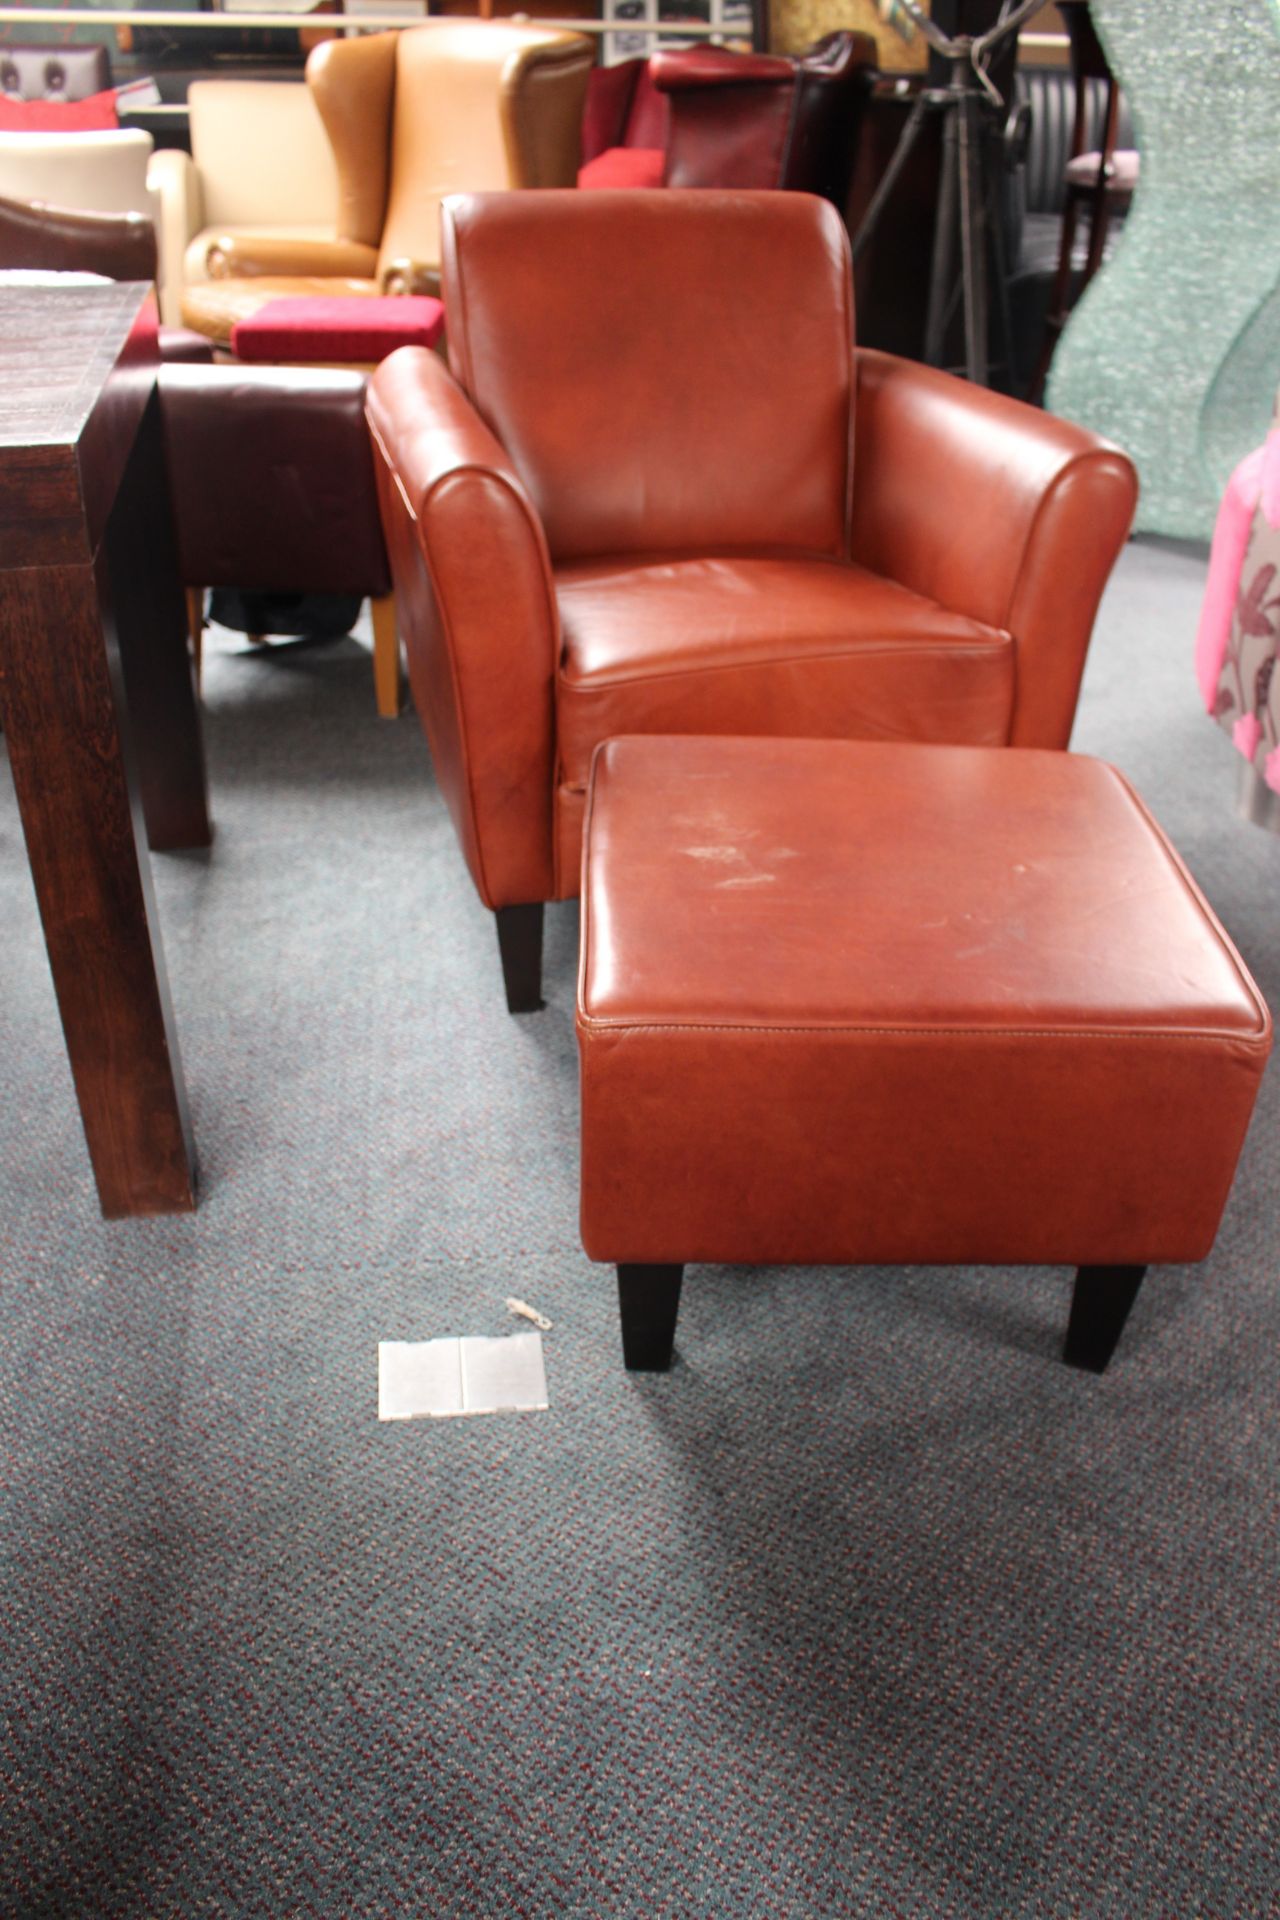 Brown leather gentleman armchair with foot stool - Image 3 of 3